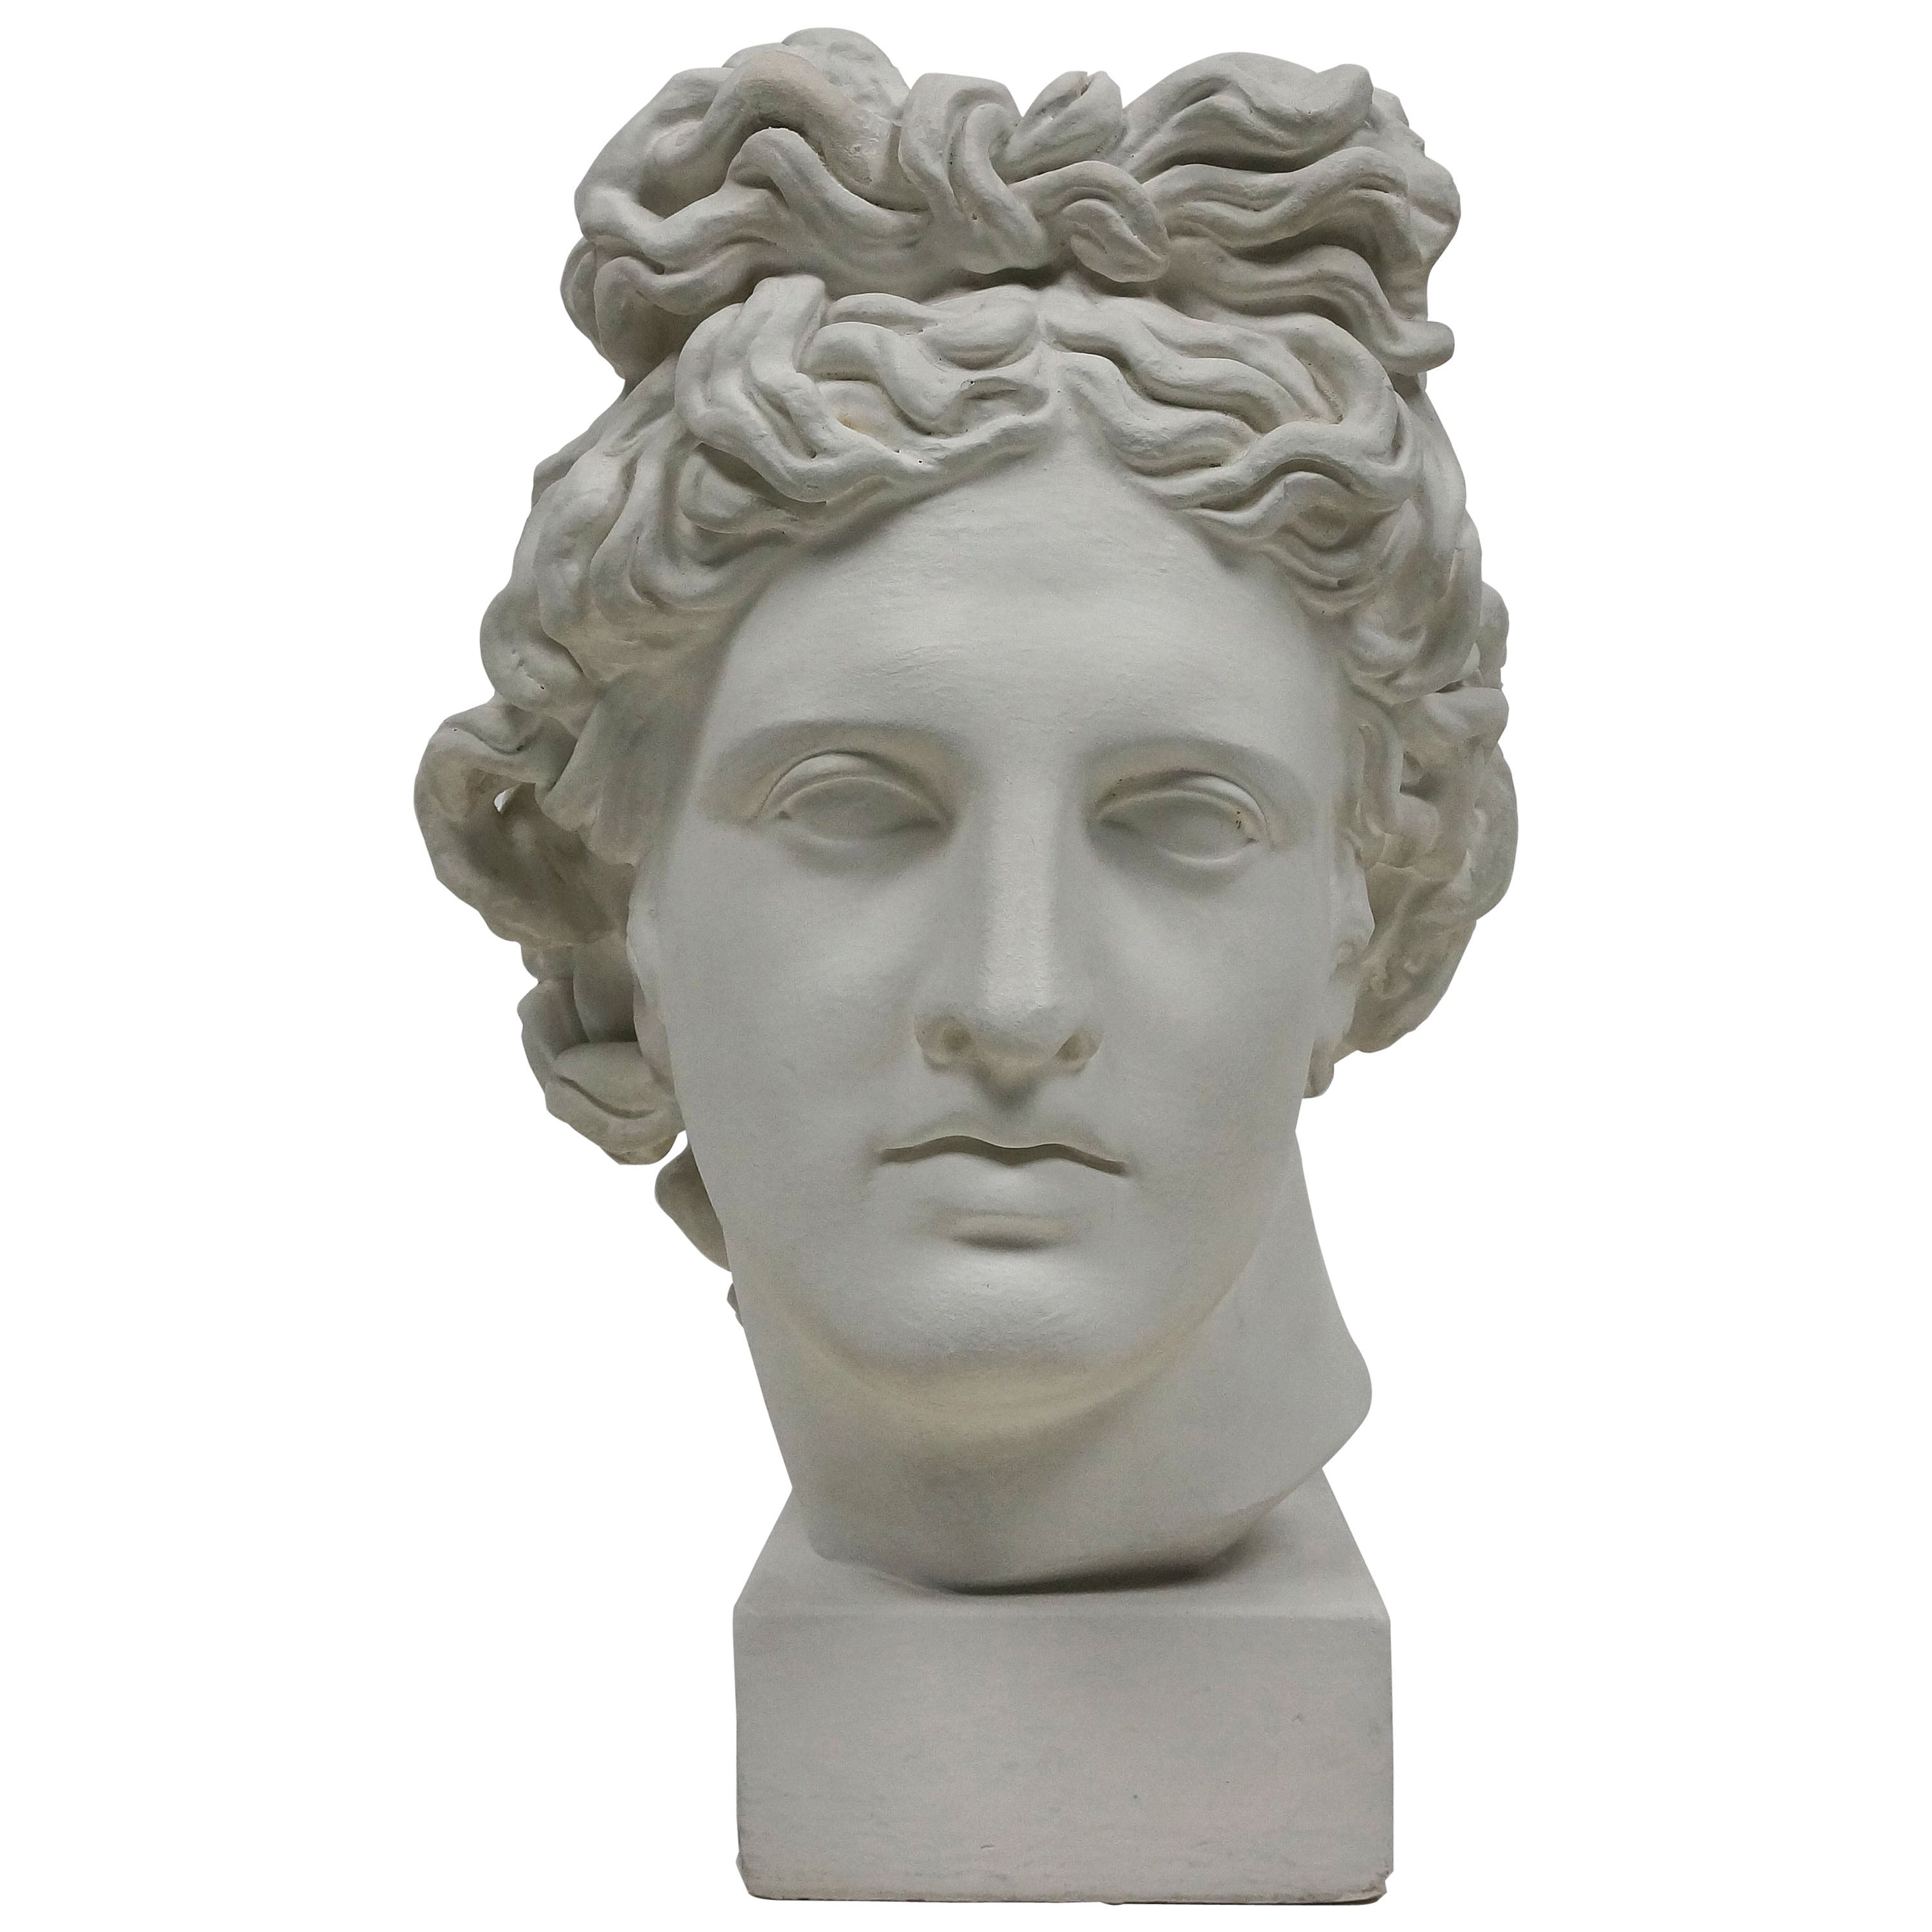 Plaster Cast of the Apollo, Italian, Late 19th Century to Early 20th Century